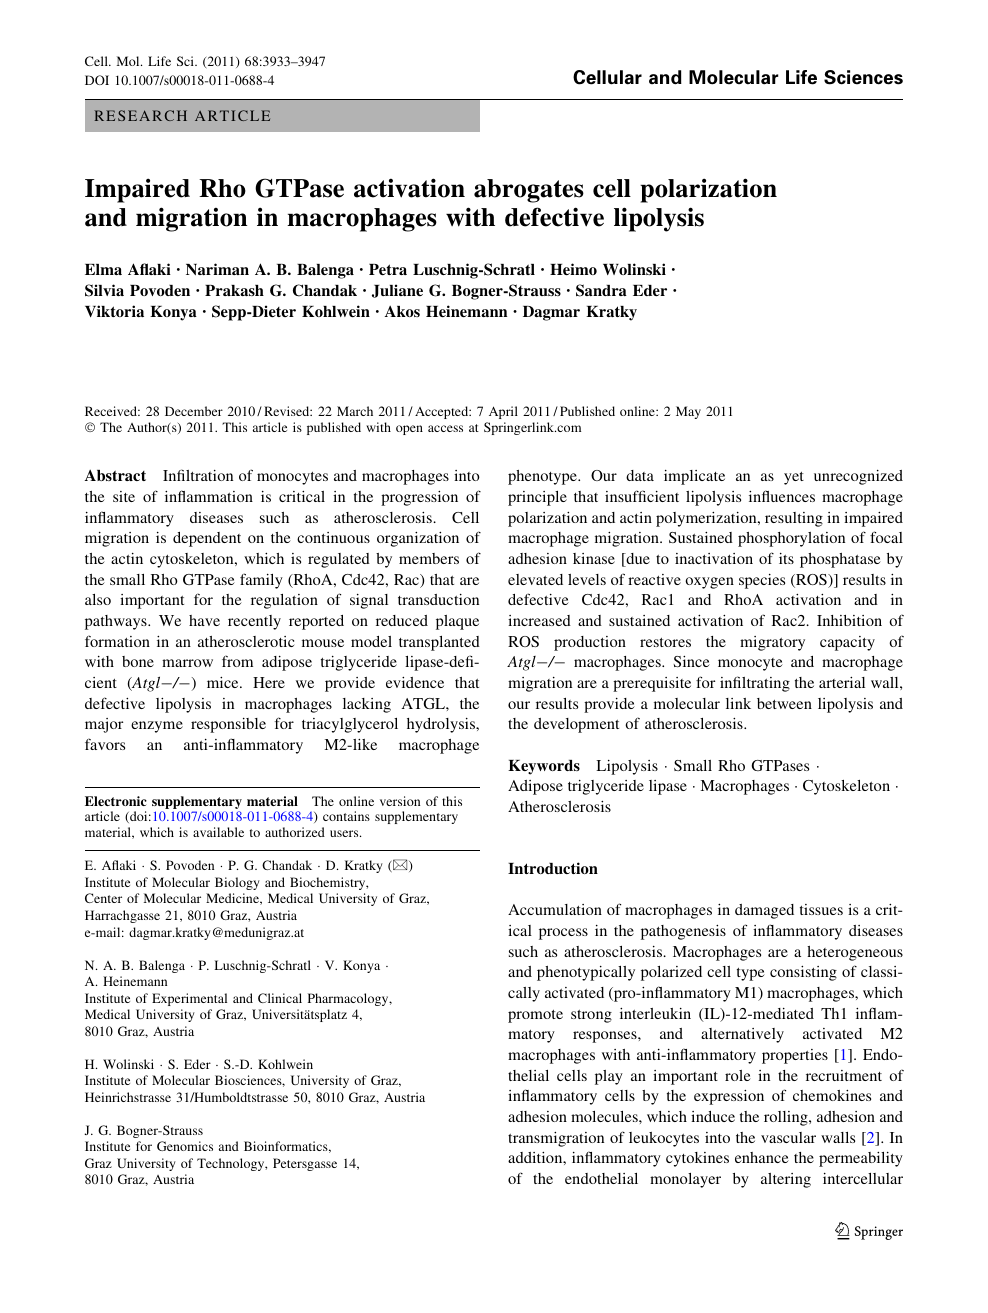 Impaired Rho Gtpase Activation Abrogates Cell Polarization And Migration In Macrophages With Defective Lipolysis Topic Of Research Paper In Biological Sciences Download Scholarly Article Pdf And Read For Free On Cyberleninka